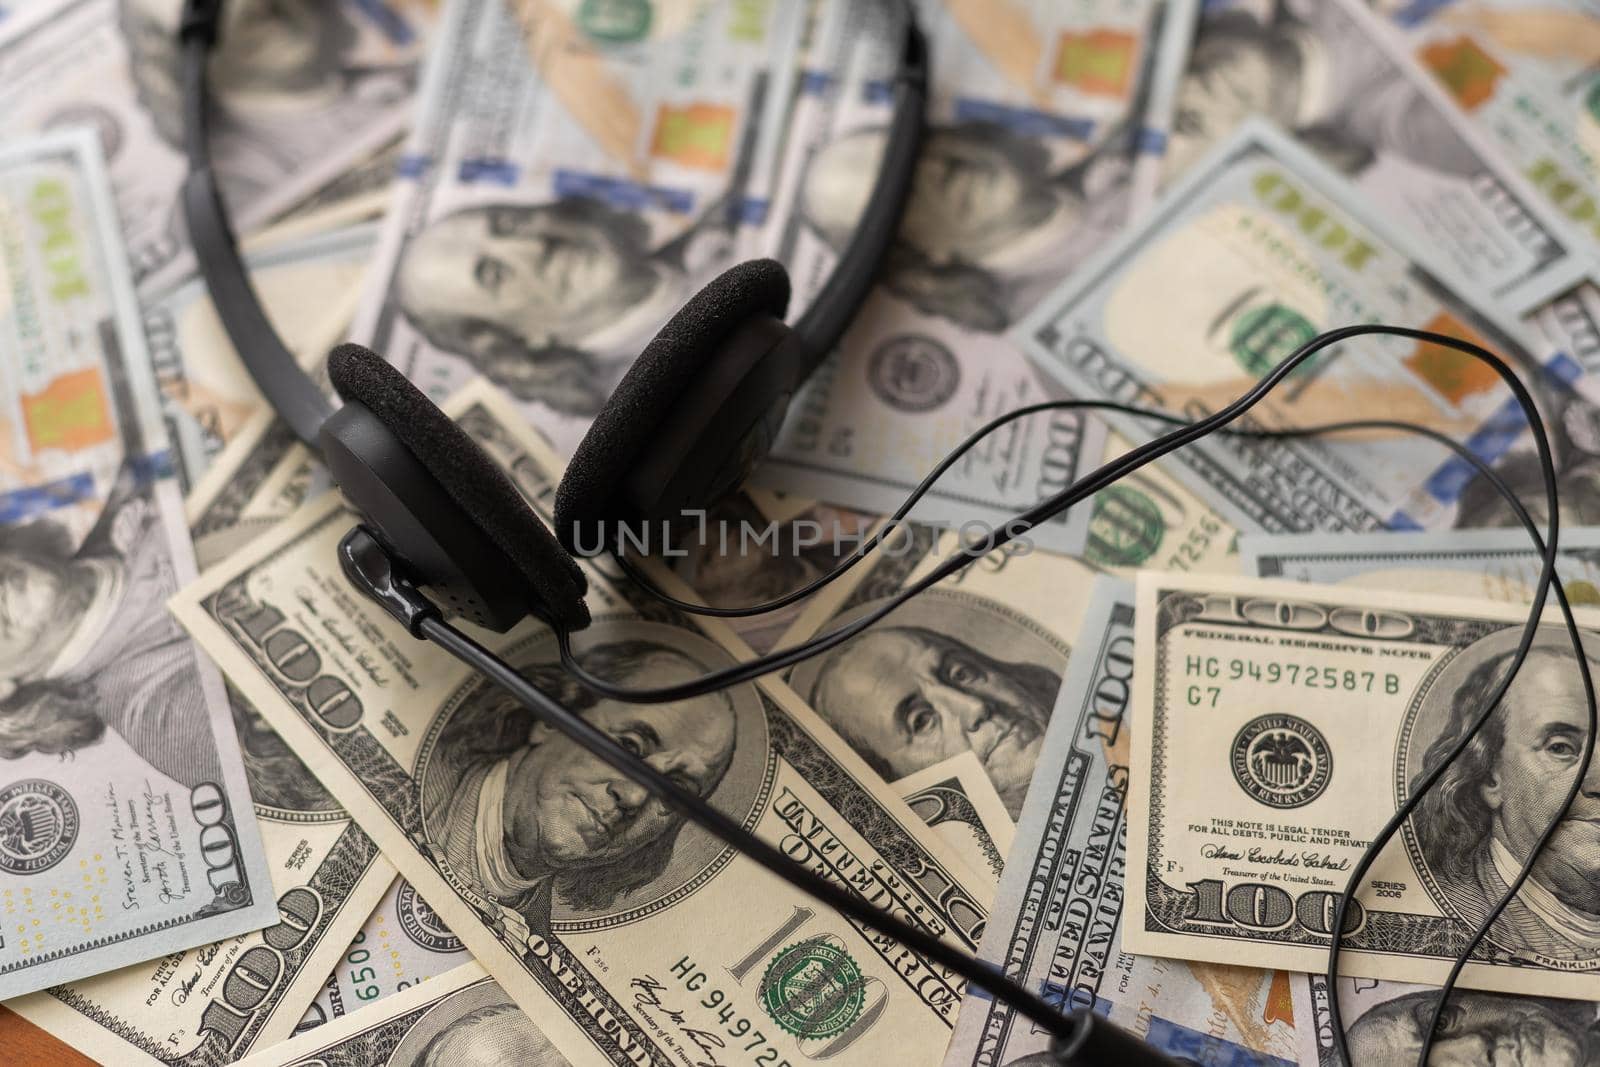 Headphones and American cash money on table.